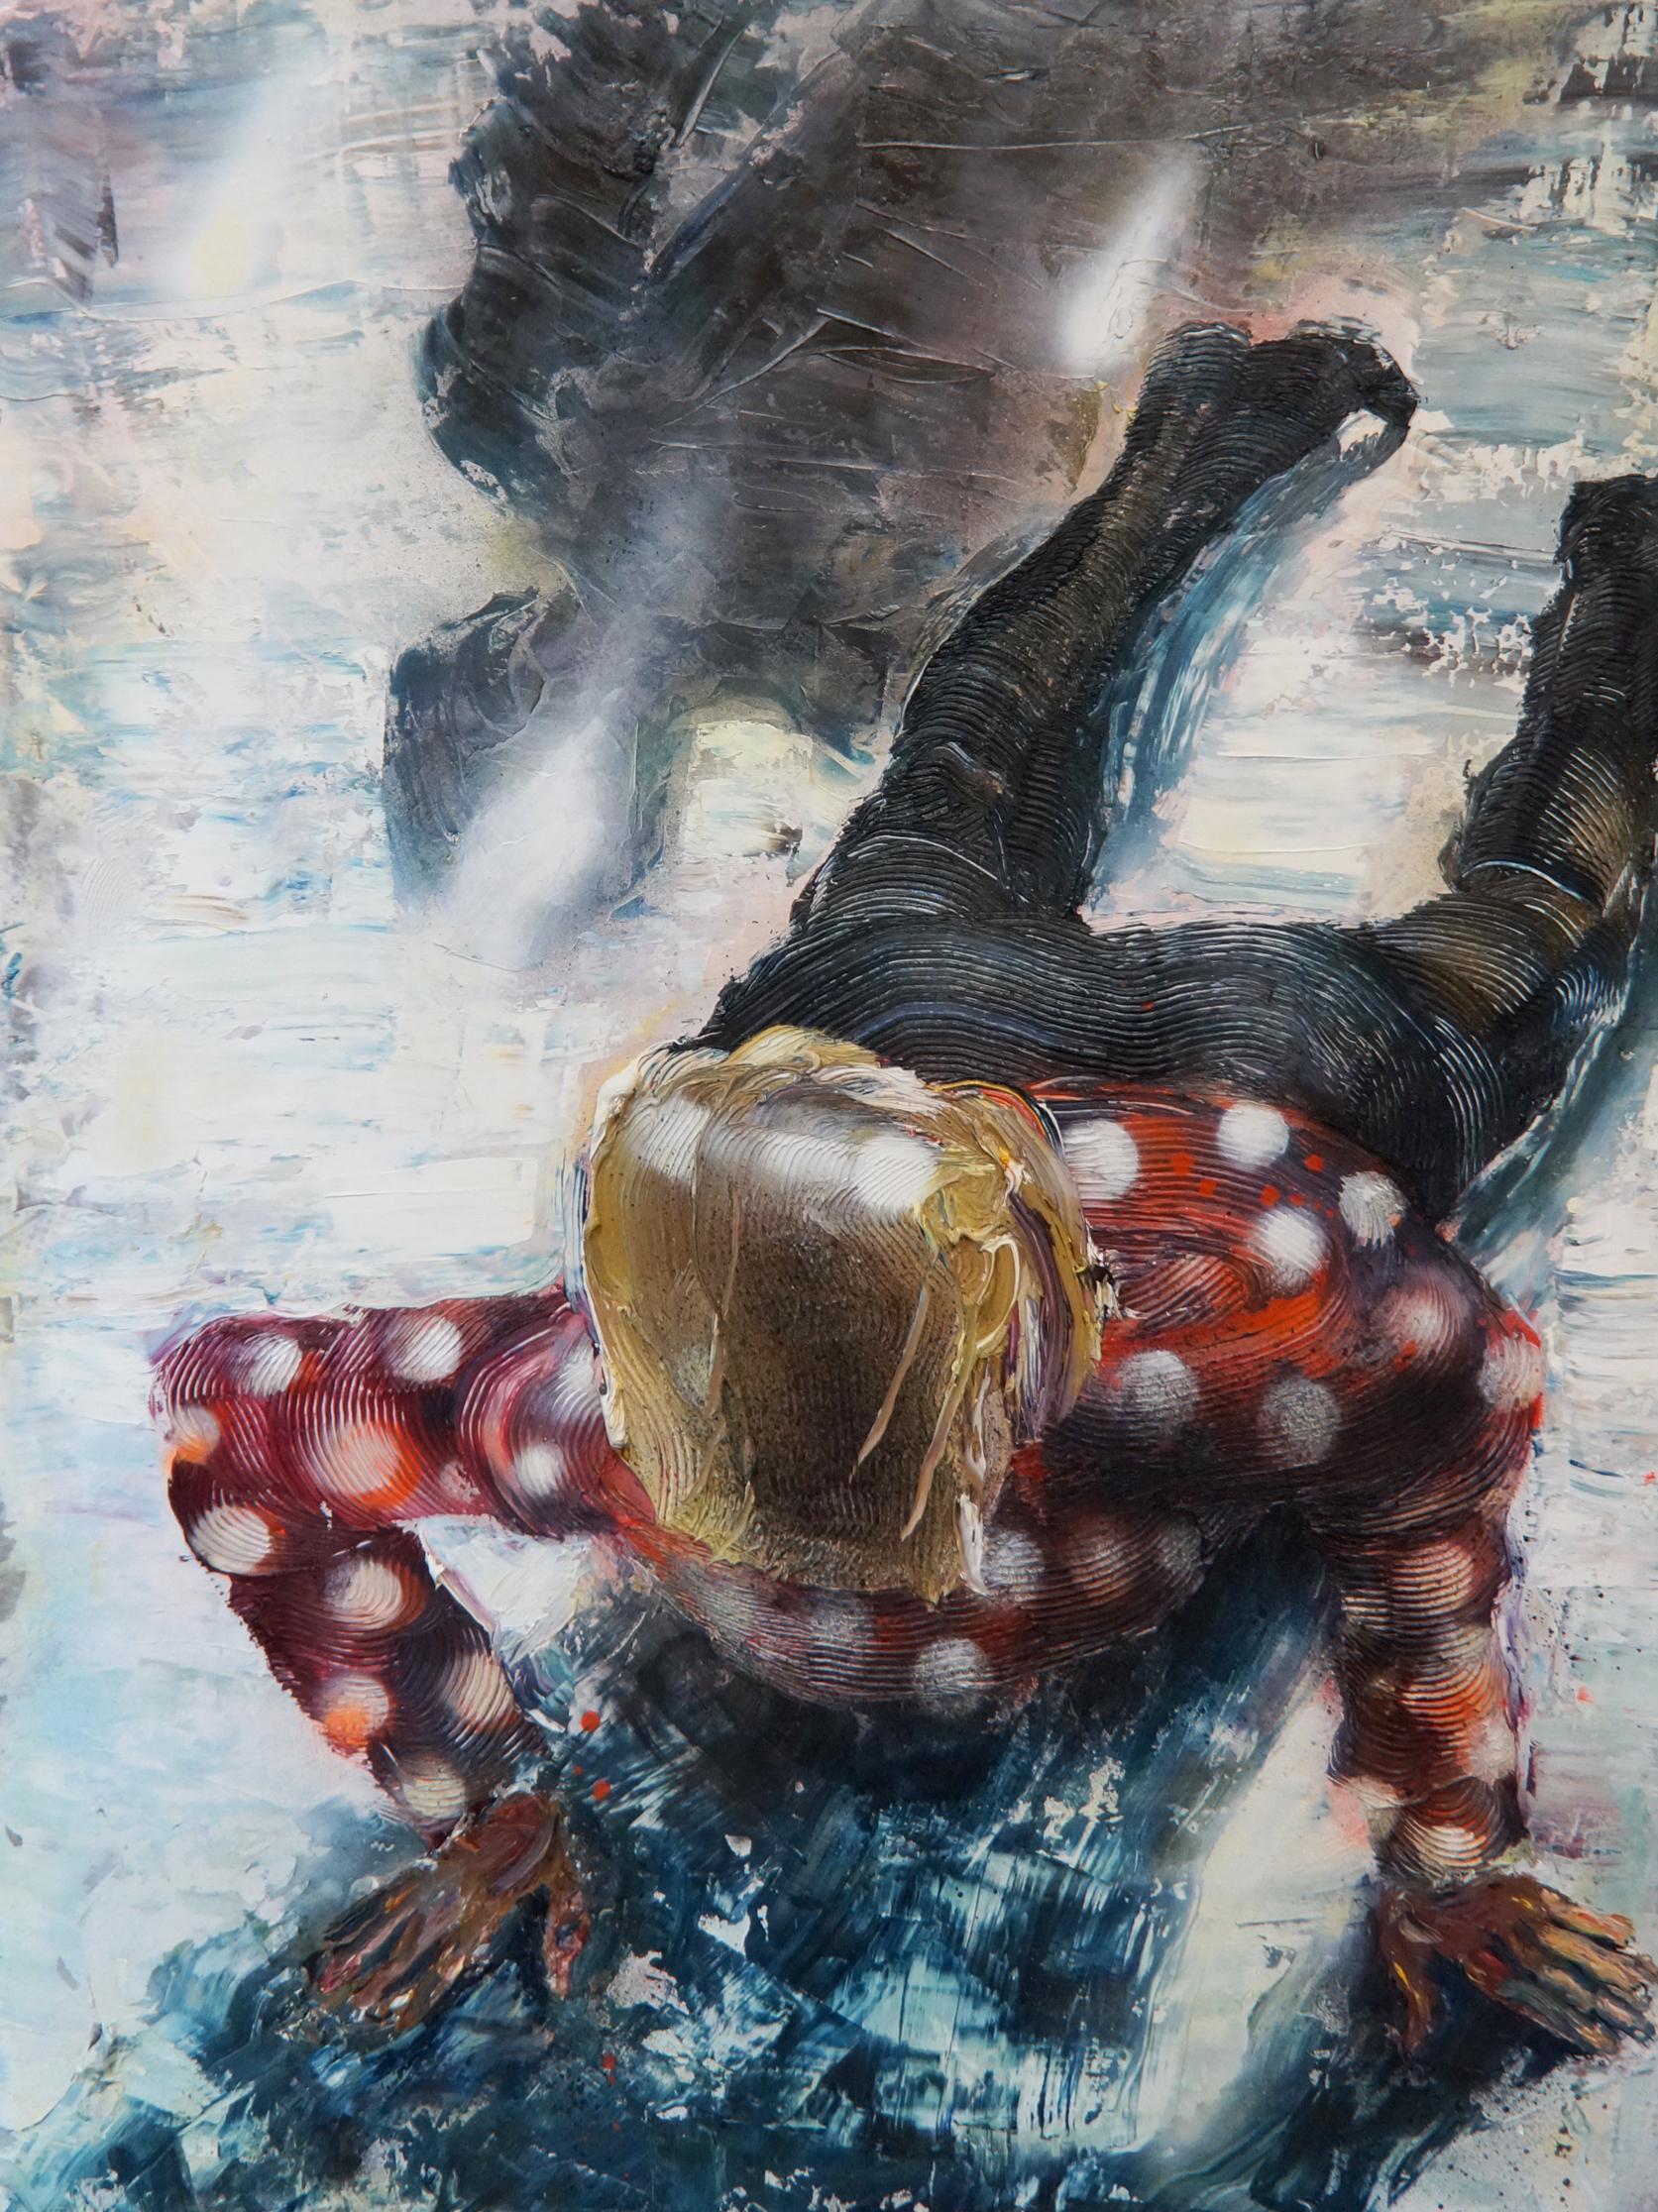 ON THE ICE - Textural figure painting - Oil and Enamel on Canvas Red, Polka-Dot